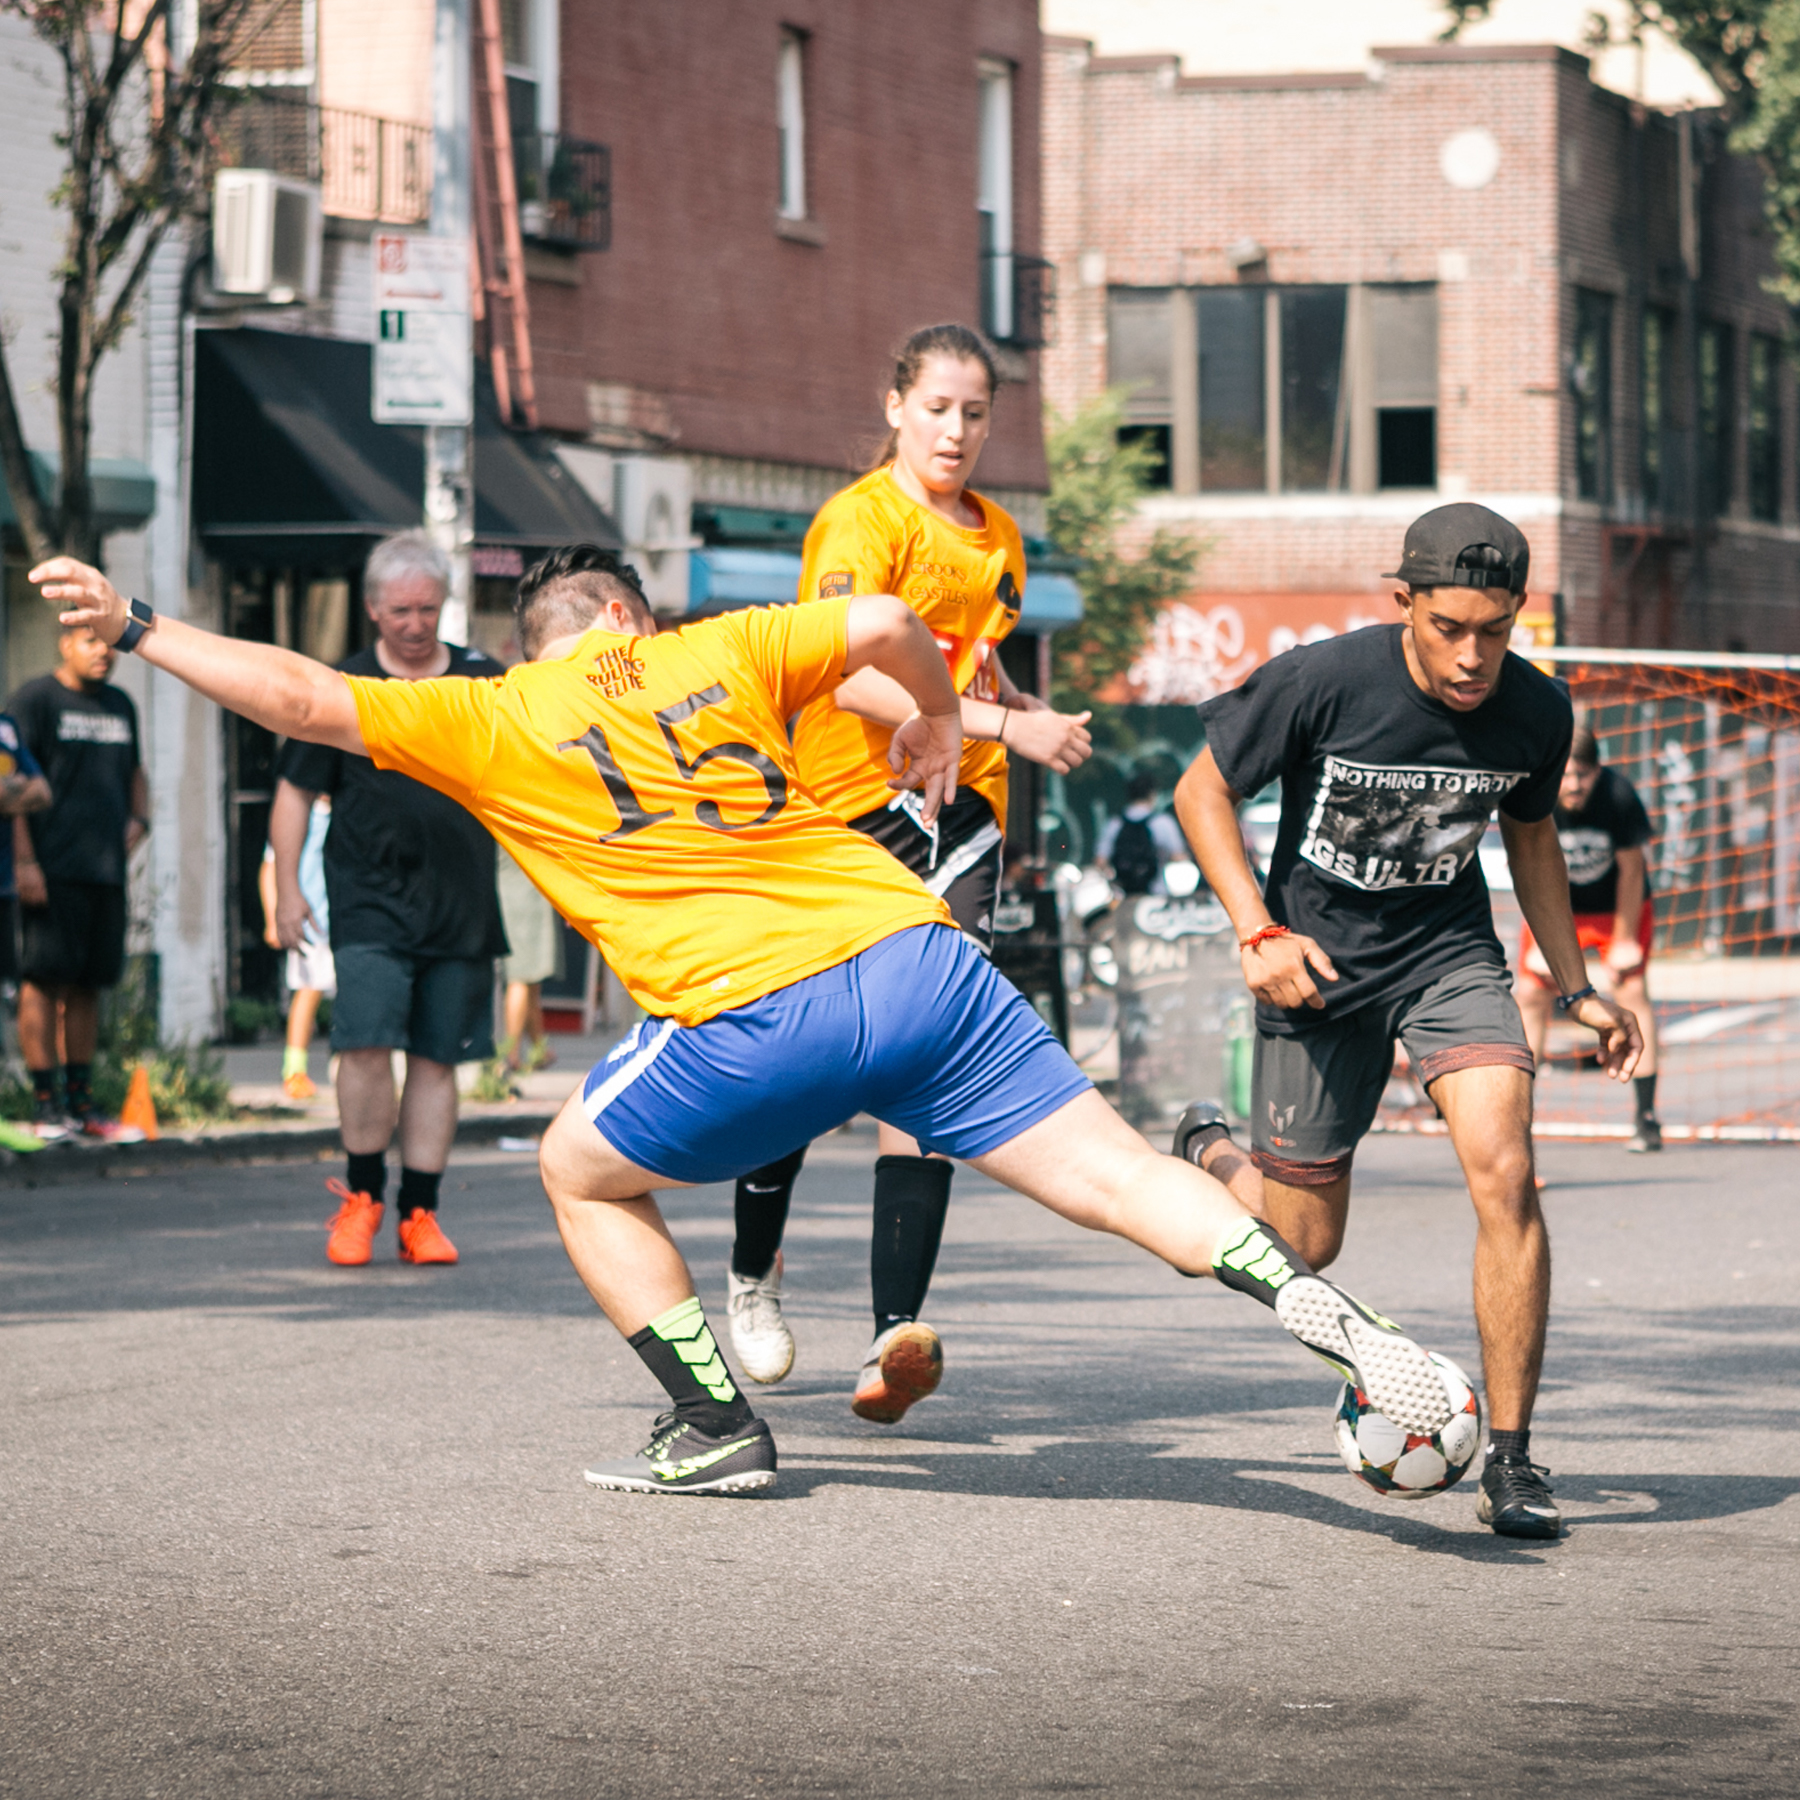 Street Soccer Tournament - man stretches for the ball